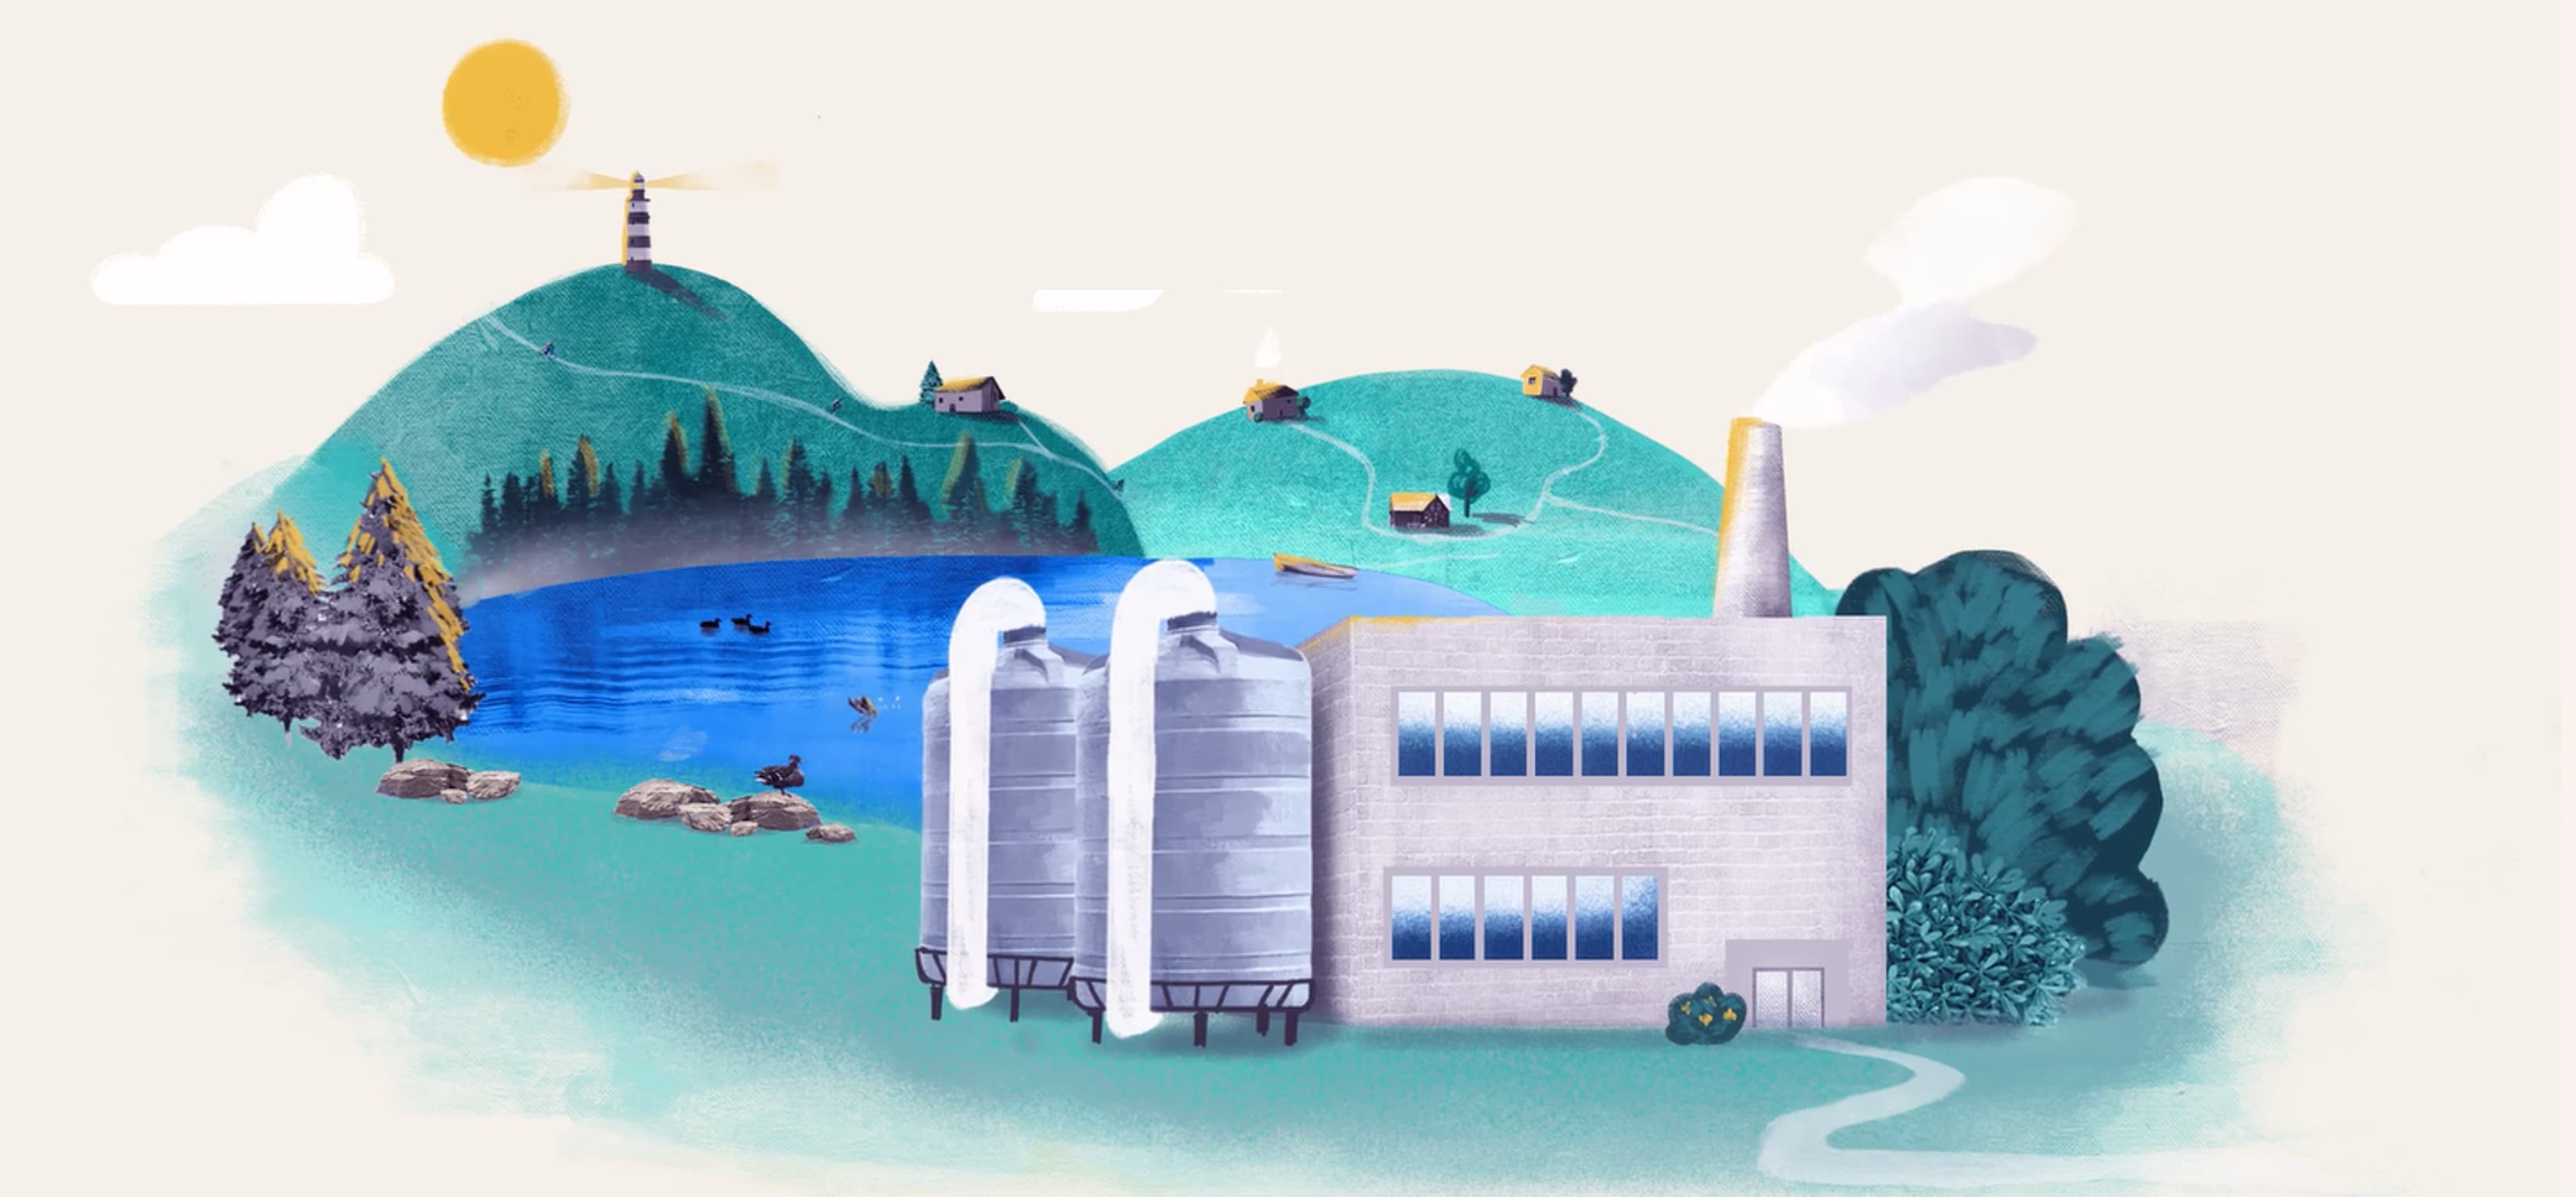 Illustration of a manufacturing plant and a natural landscape